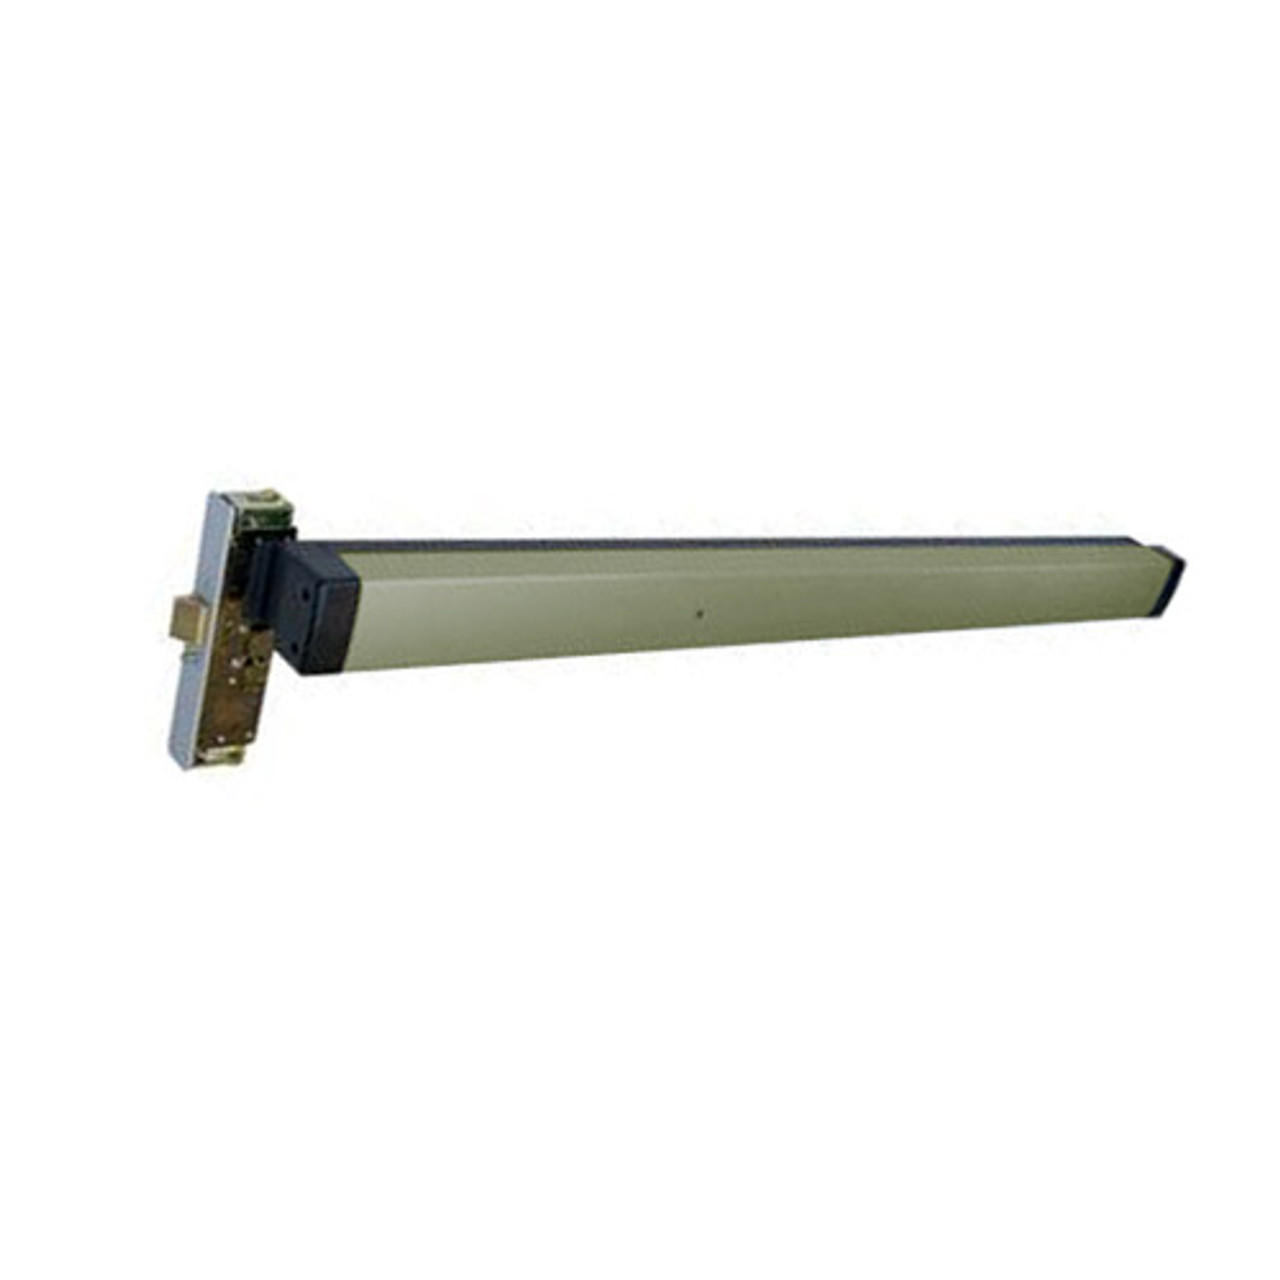 3310-81-36-628 Adams Rite Mortise Exit Device